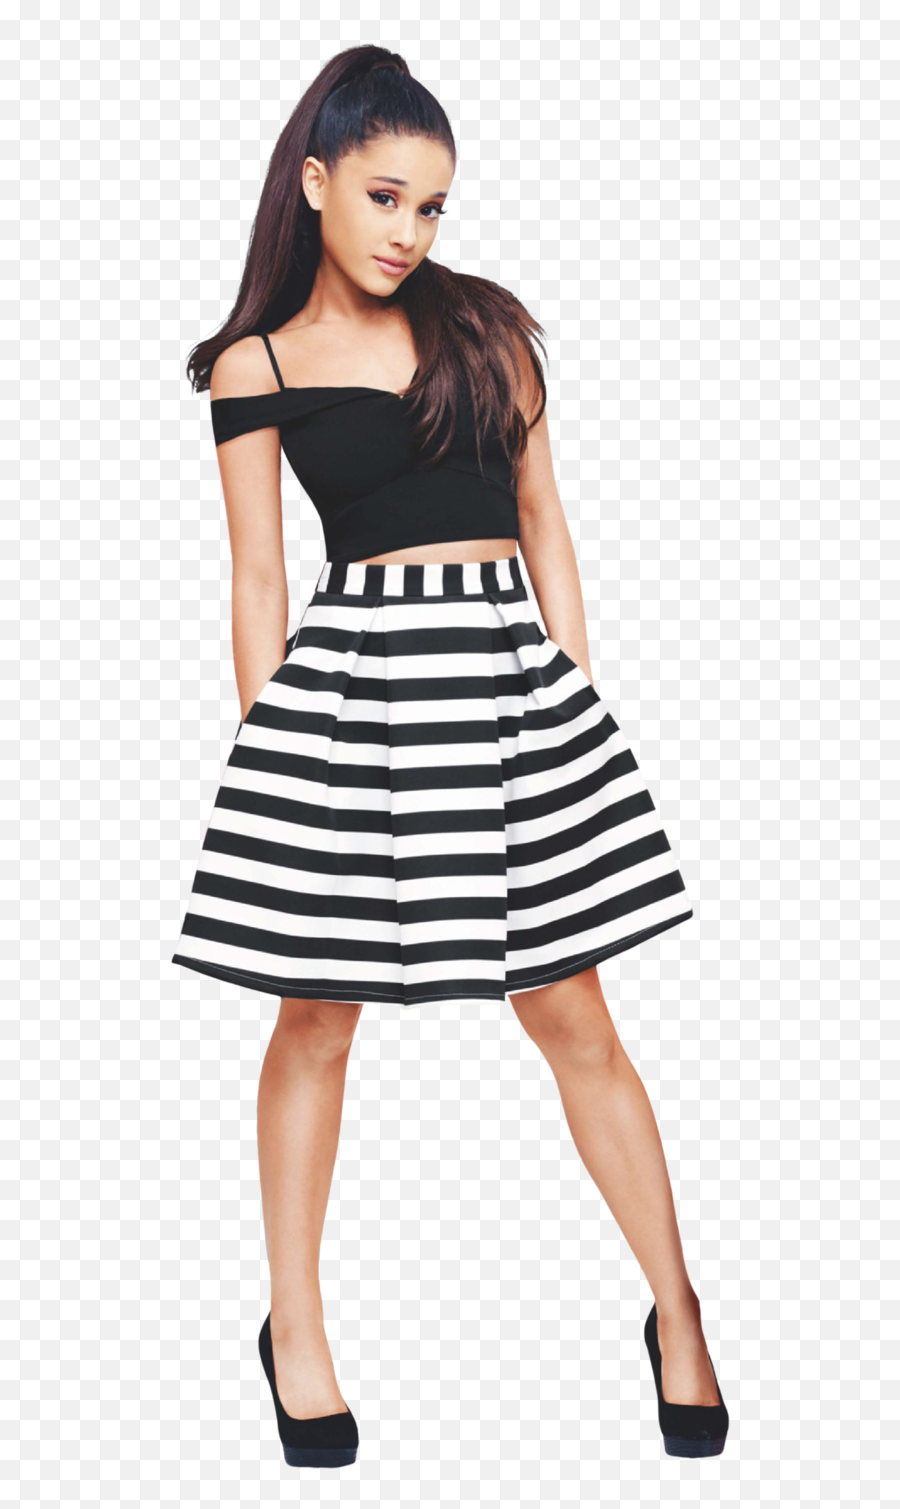 Ariana Grande Png Picture - Cat Valentine Outfits Victorious,Ariana Grande Transparent Background